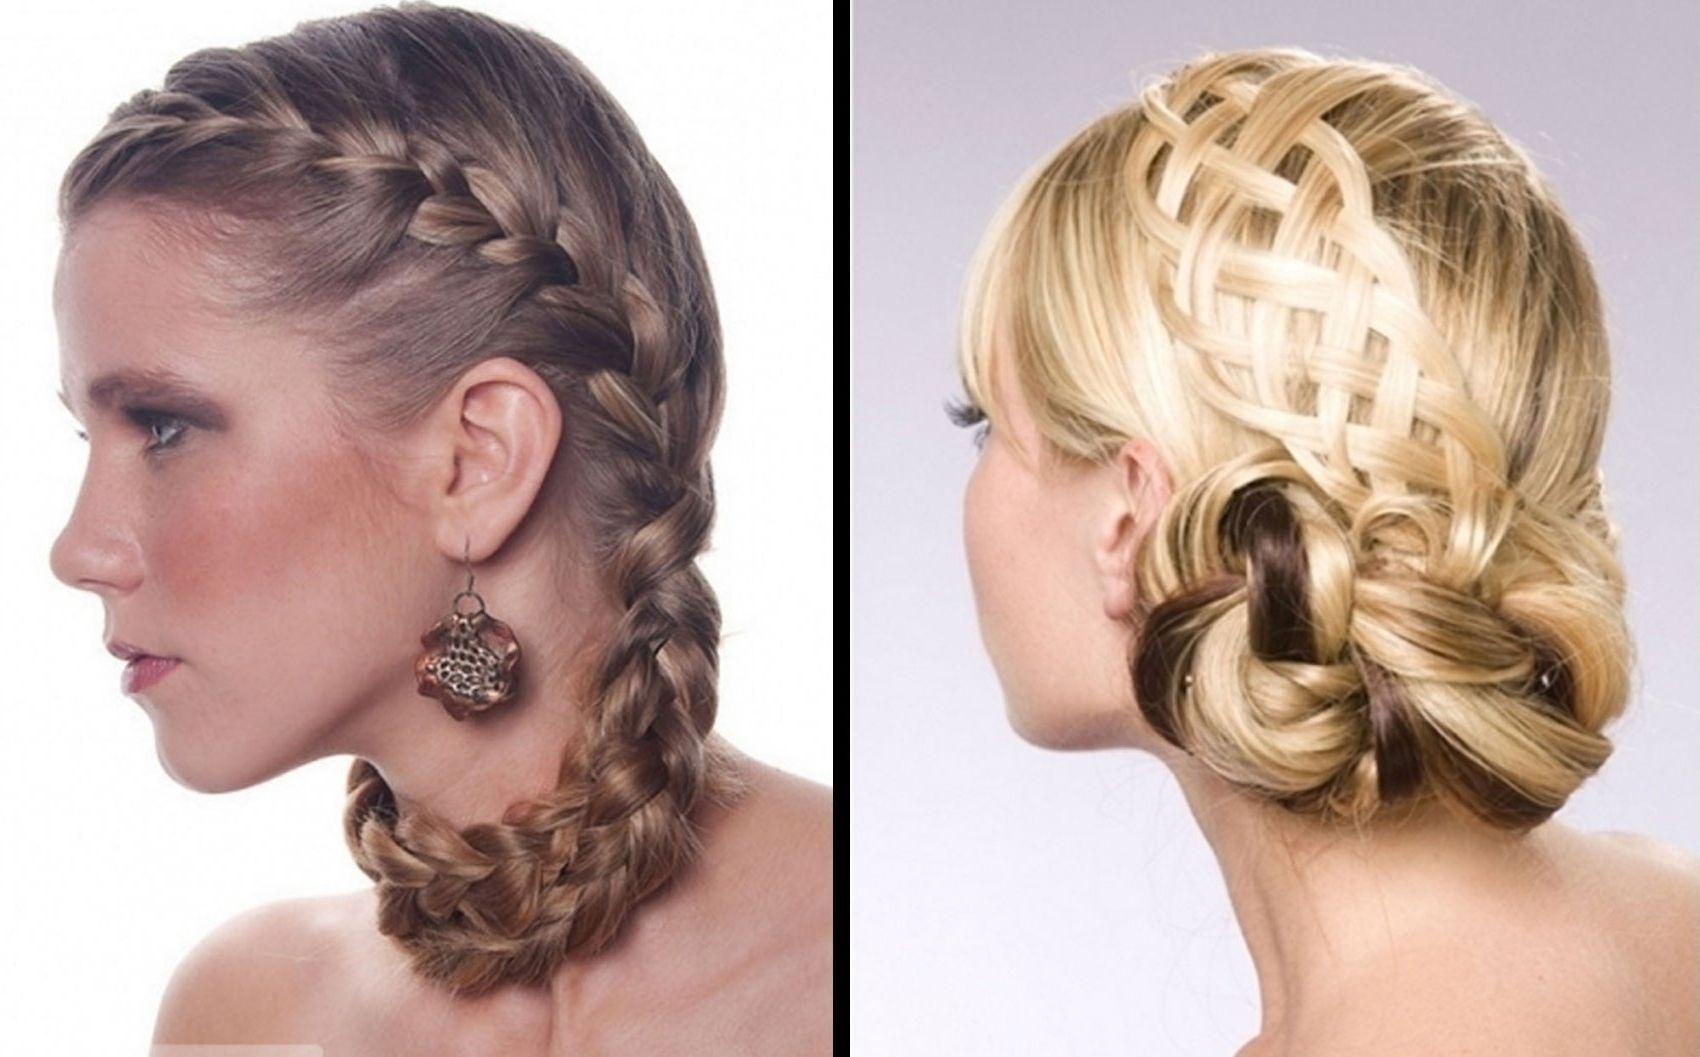 Braided Updo Hairstyles Hair Salon Formal For Women | Medium Hair Throughout Braided Updo Hairstyles (View 6 of 15)